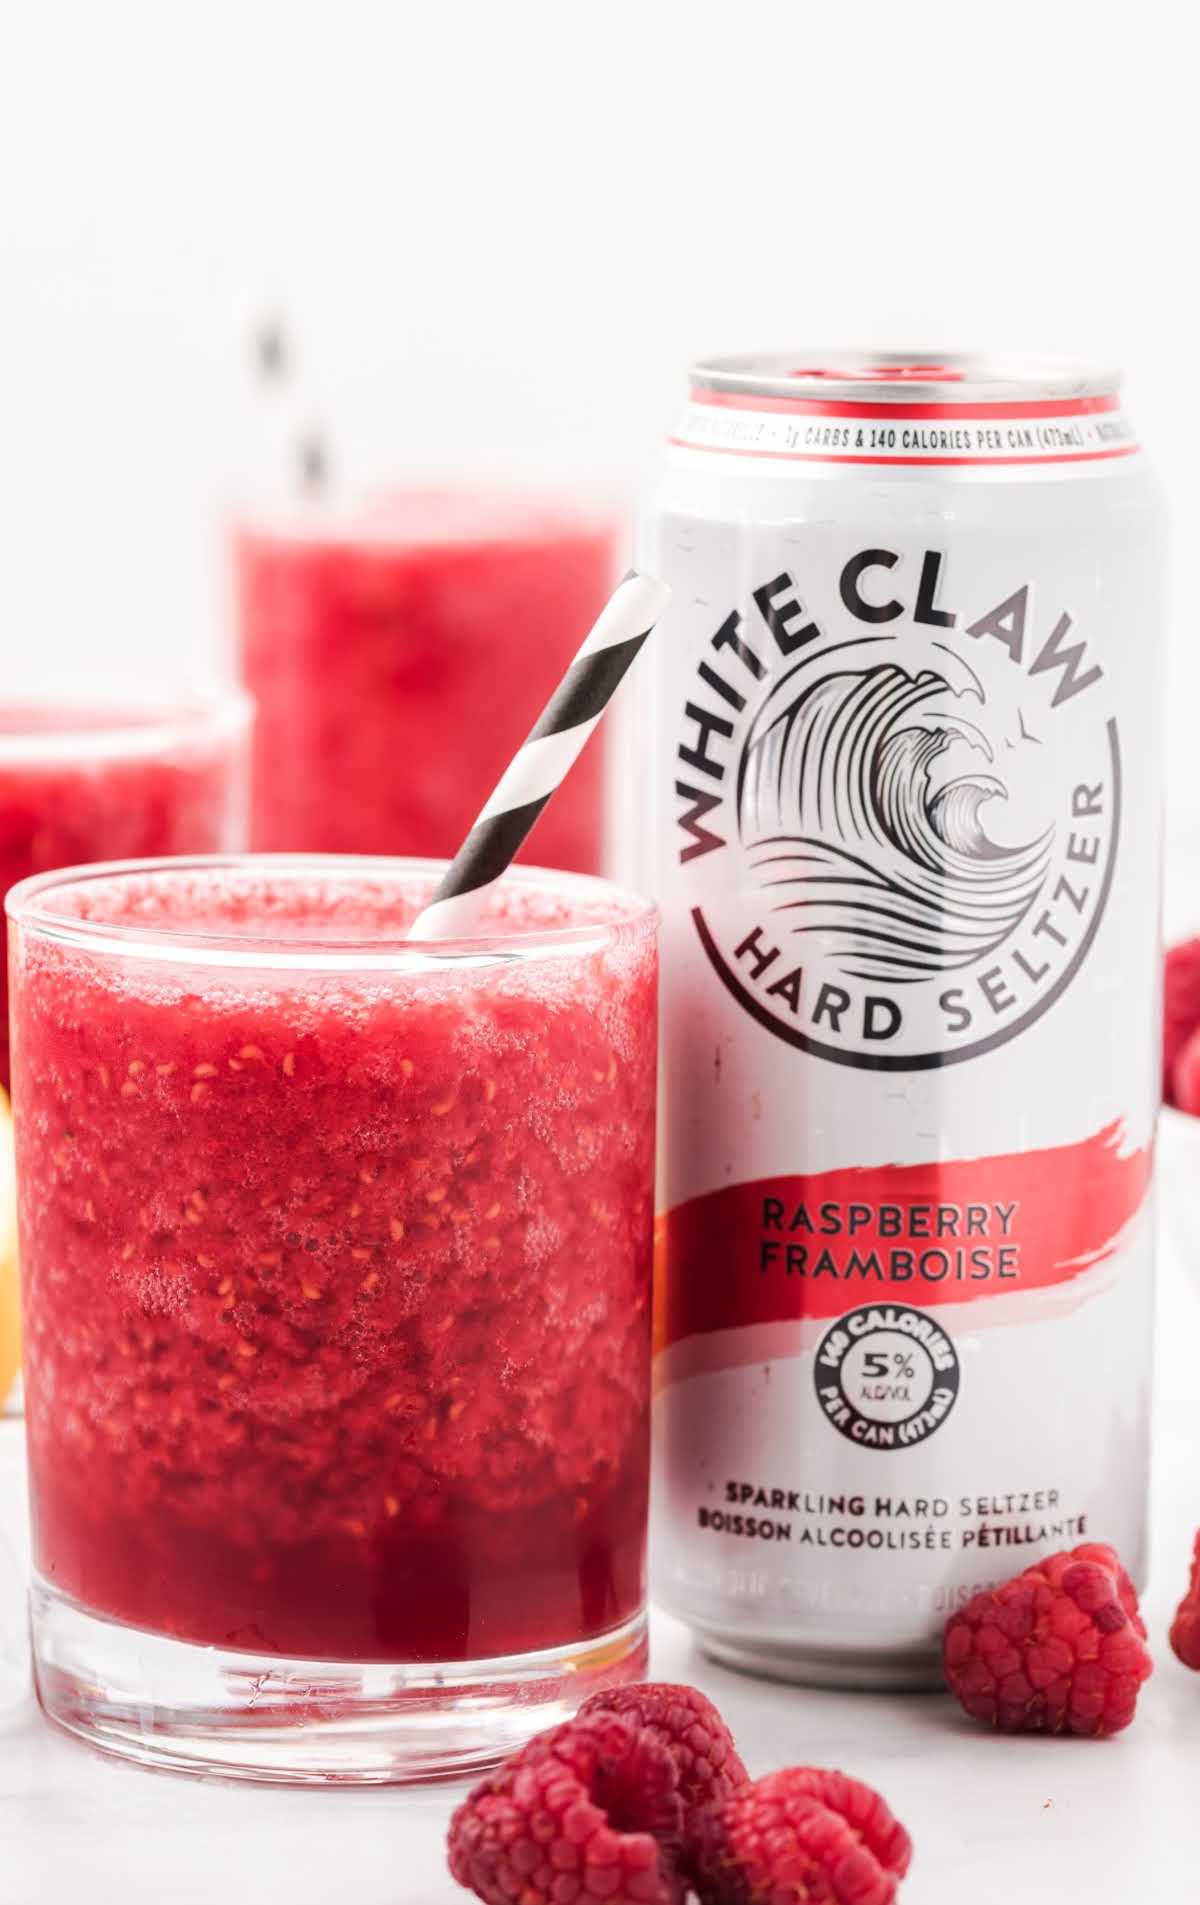 close up shot of White Claw slushie in a glass cup with a straw and a can of white claw